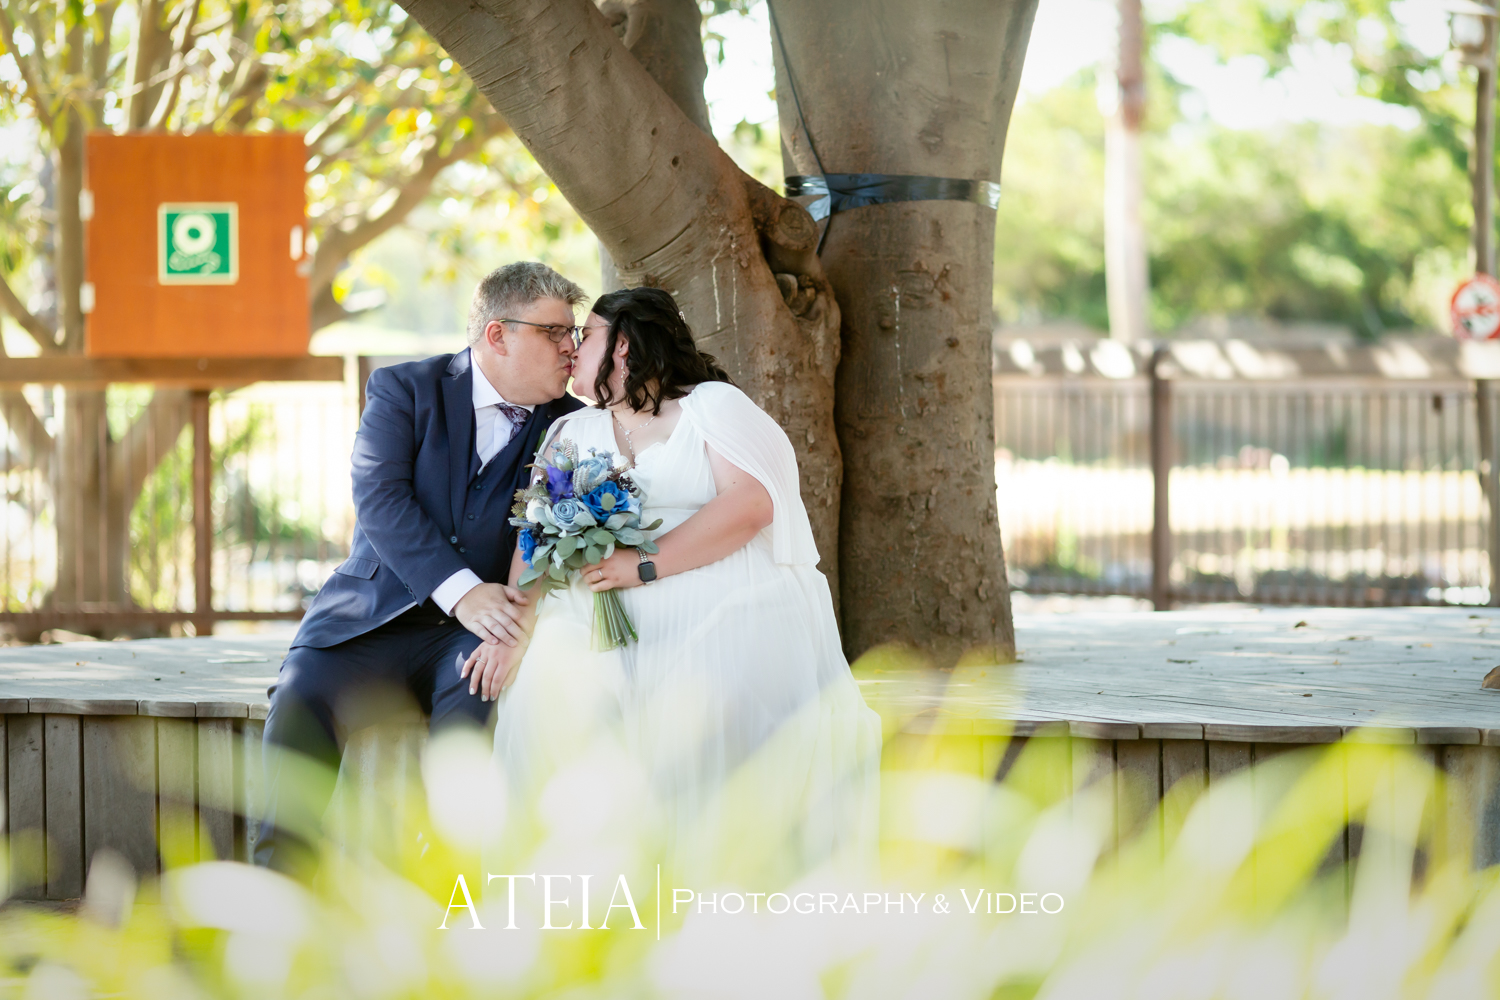 , Nicole and Brenton&#8217;s wedding photography at Werribee Zoo captured by ATEIA Photography &#038; Video